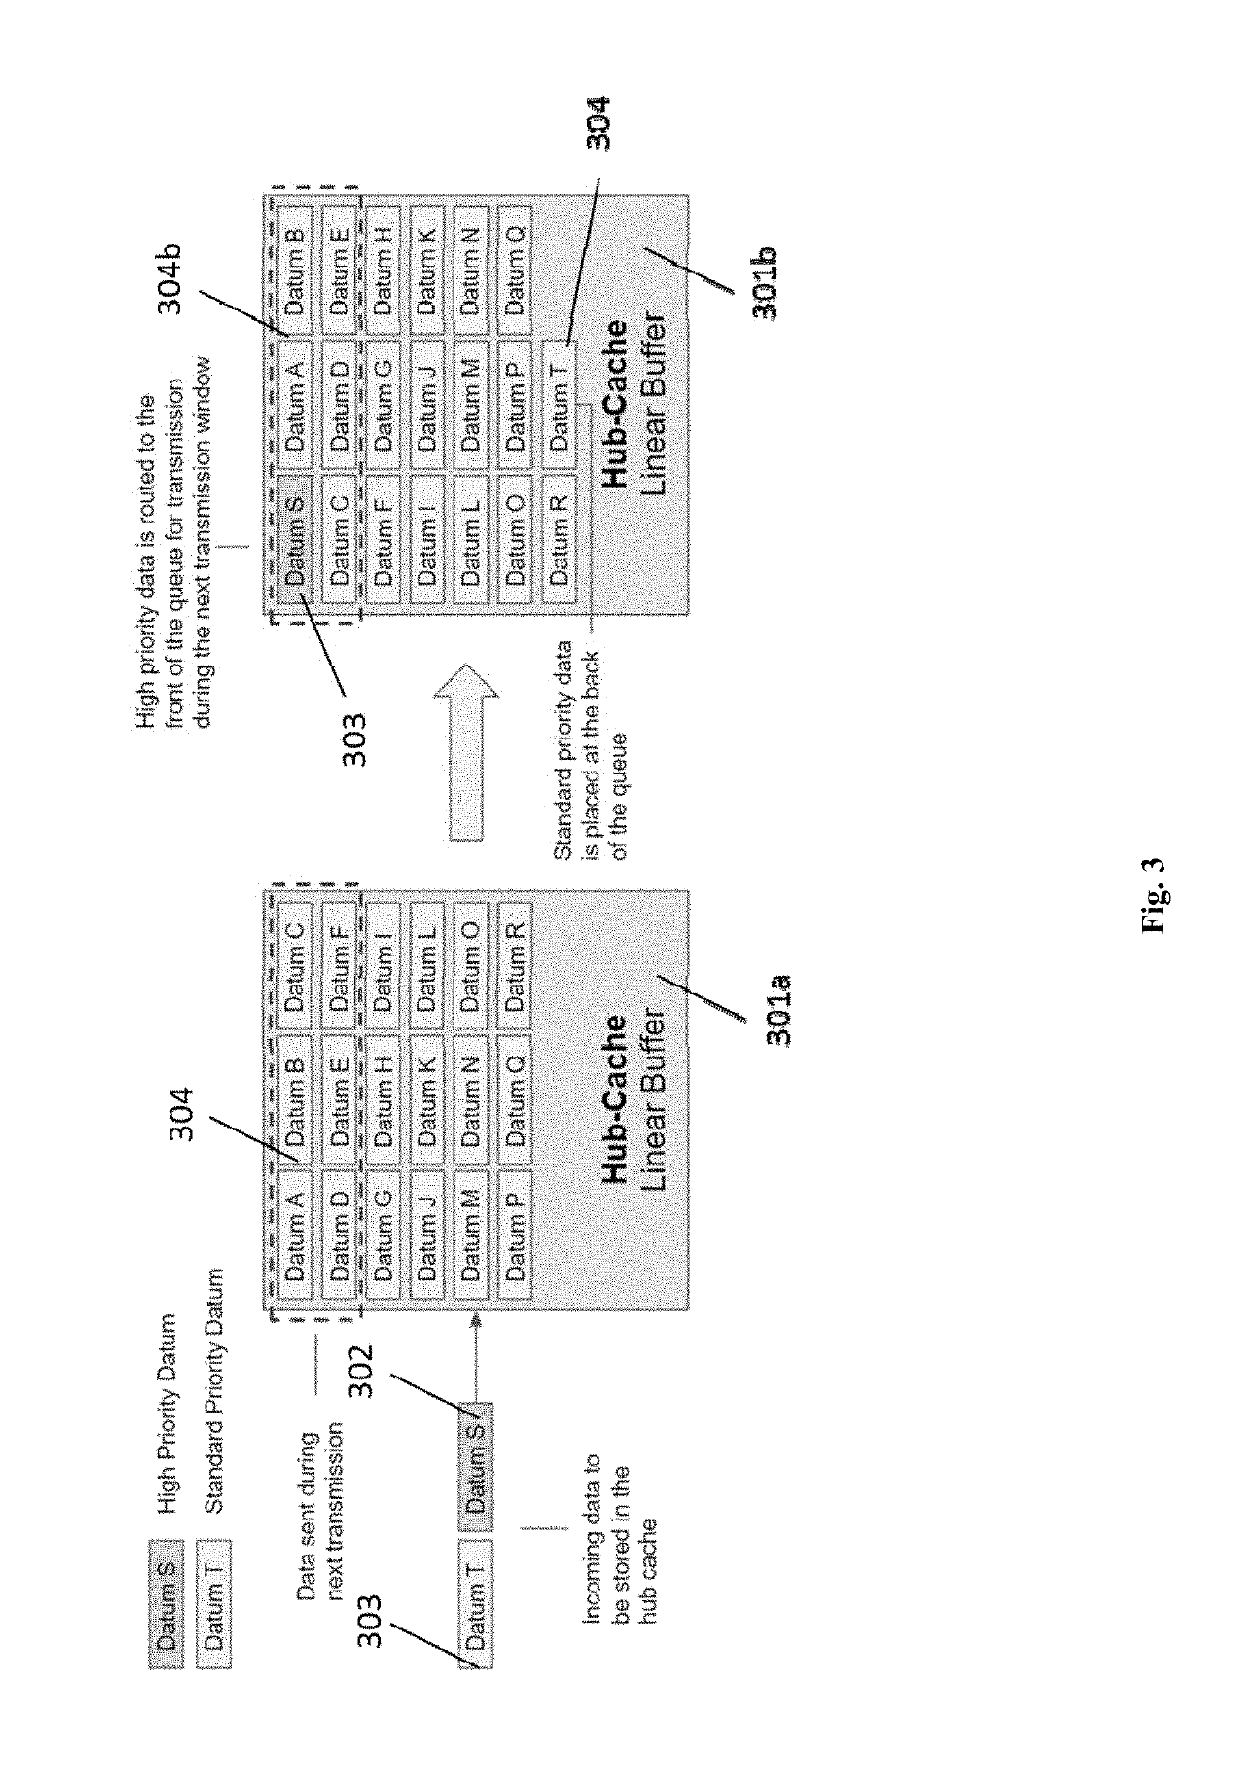 Devices and methods for specialized machine-to-machine communication transmission network modes via edge node capabilities